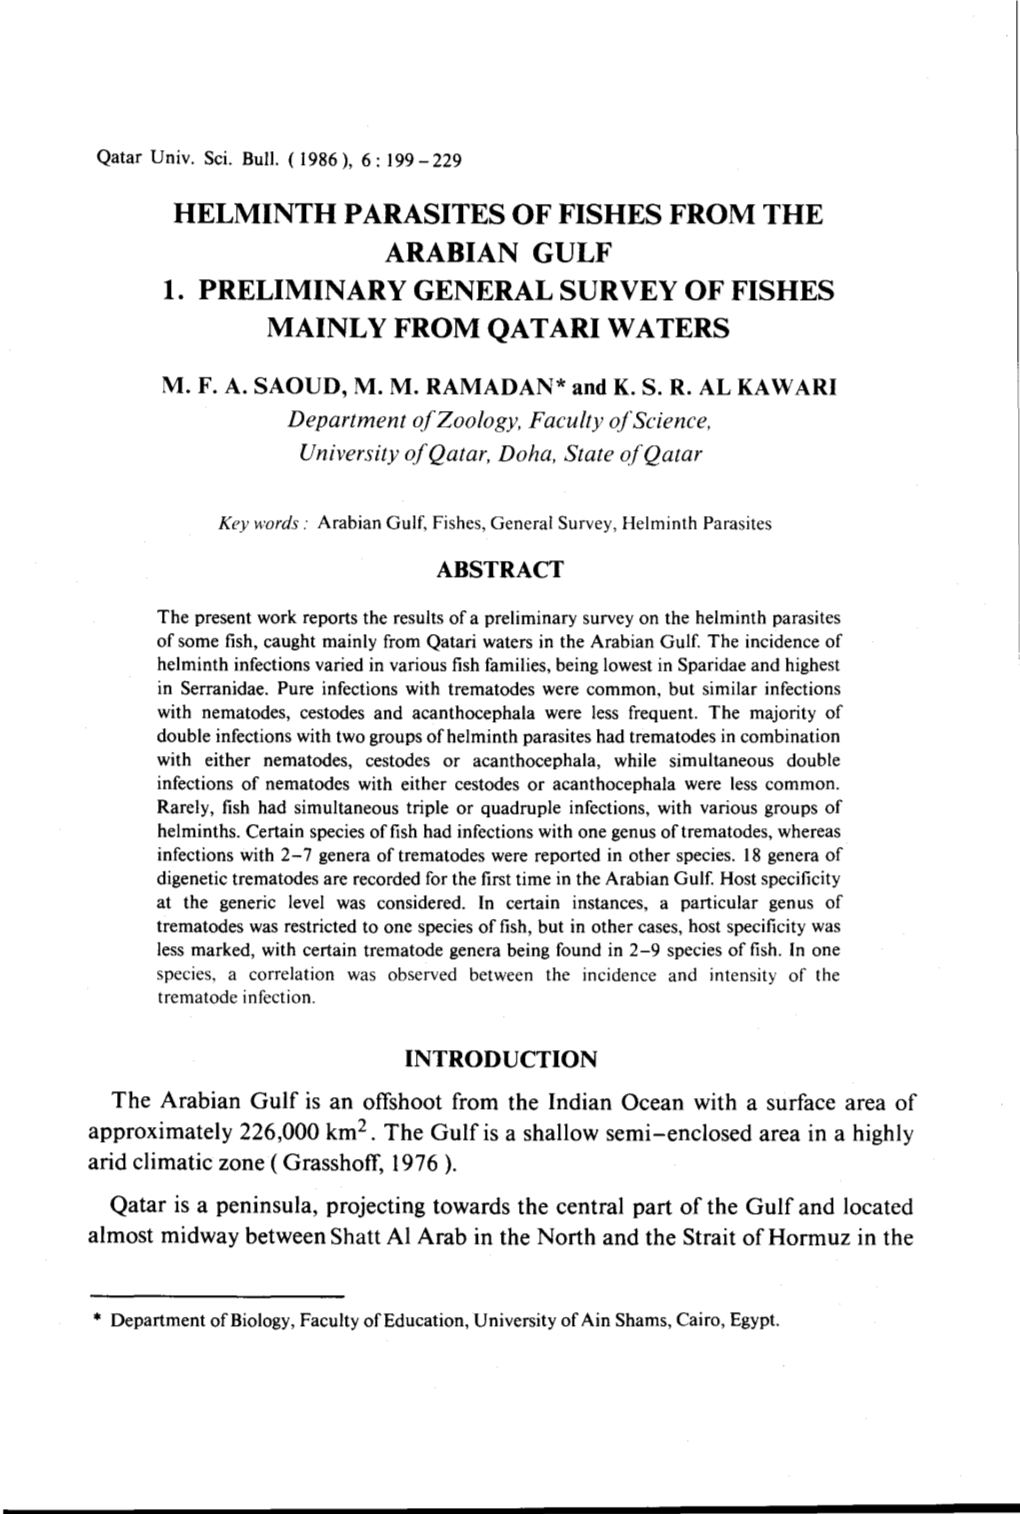 Helminth Parasites of Fishes from the Arabian Gulf 1. Preliminary General Survey of Fishes Mainly from Qatari Waters